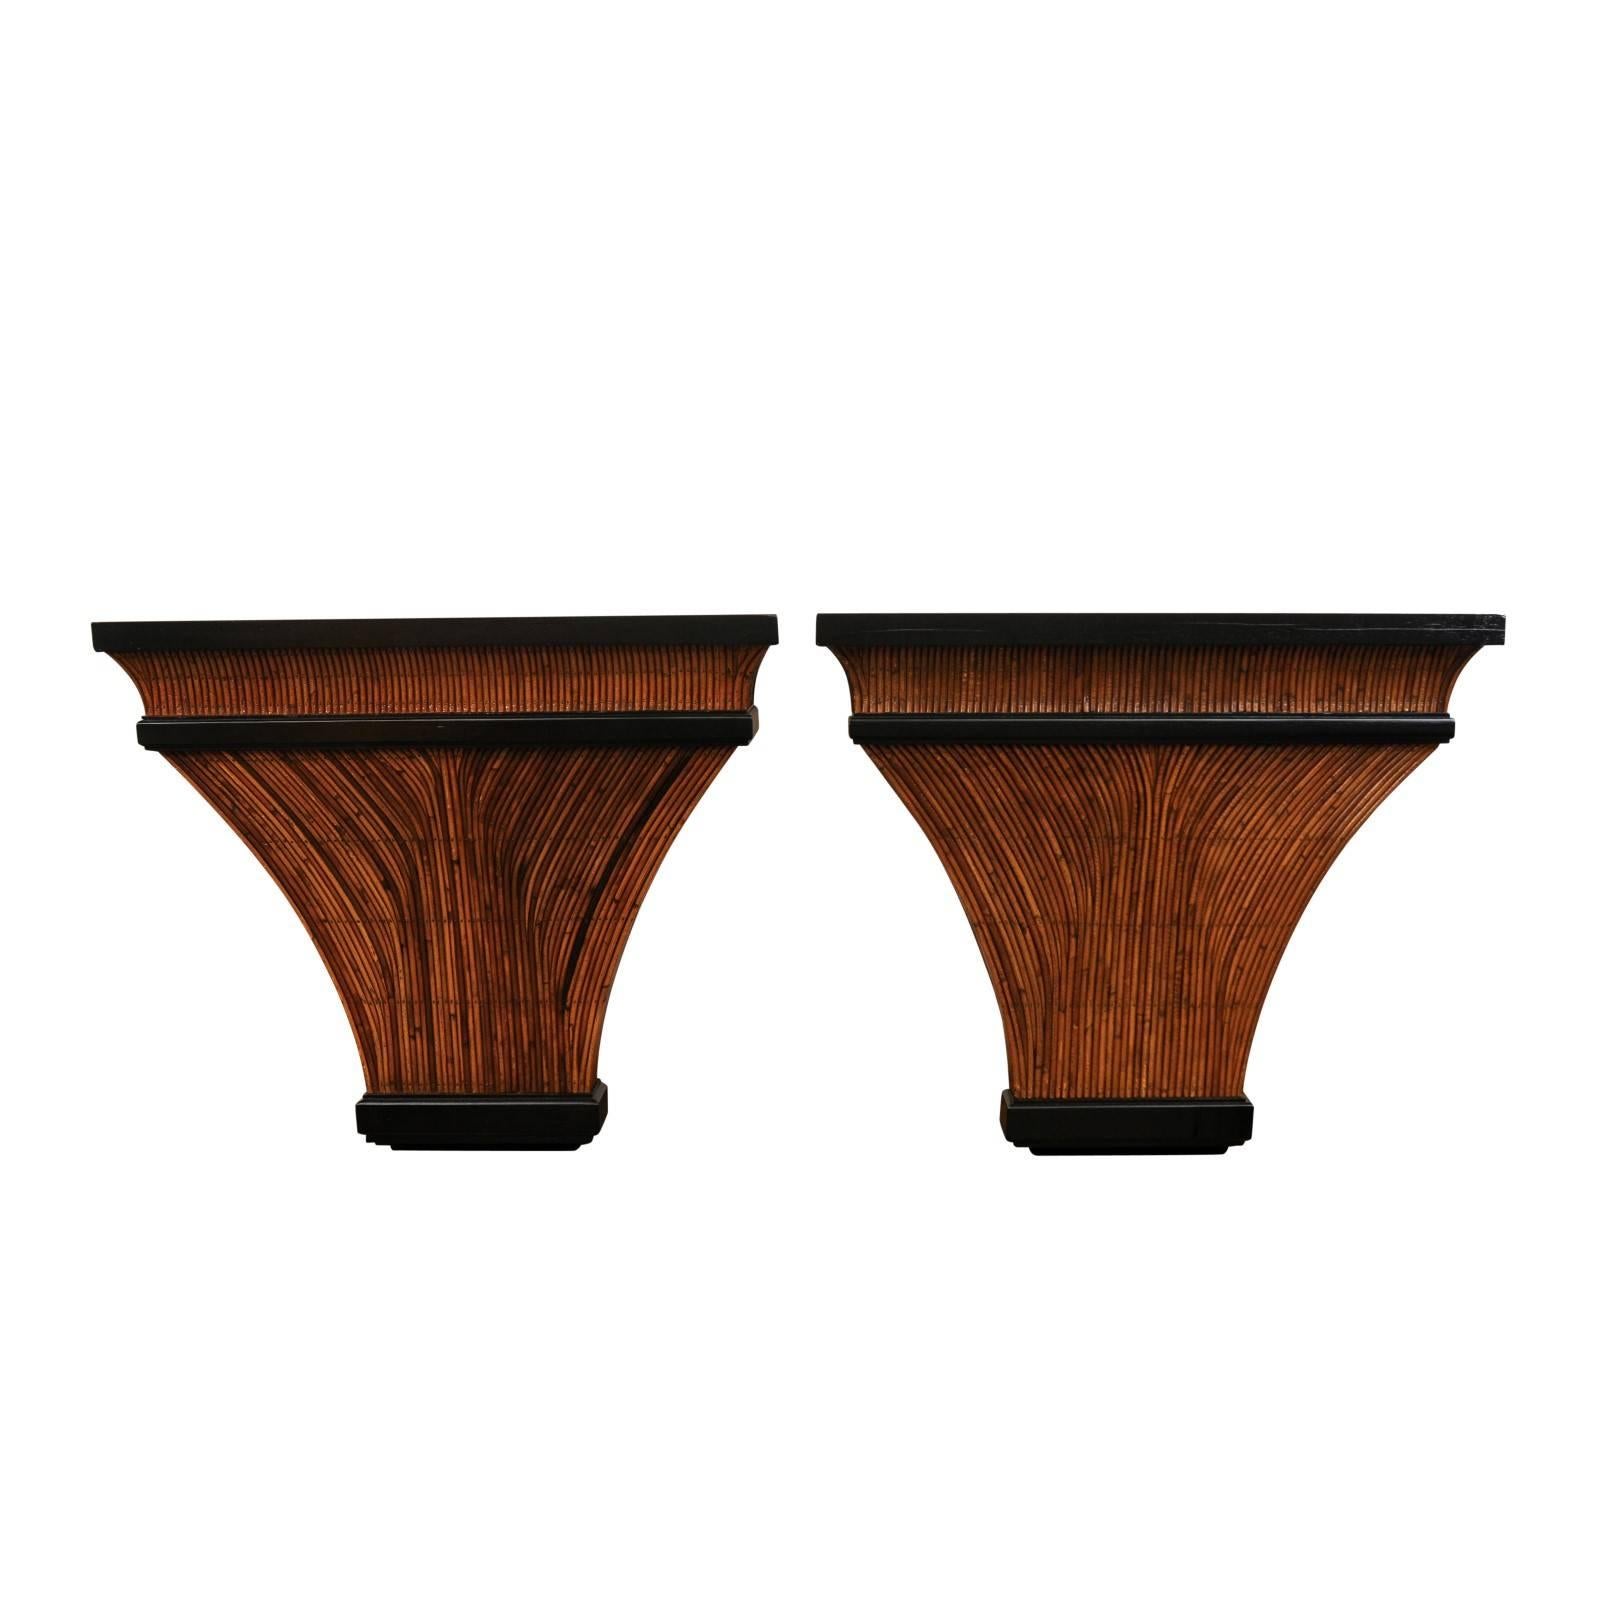 Exceptional Restored Pair of Bamboo and Burl Elm Consoles, circa 1975